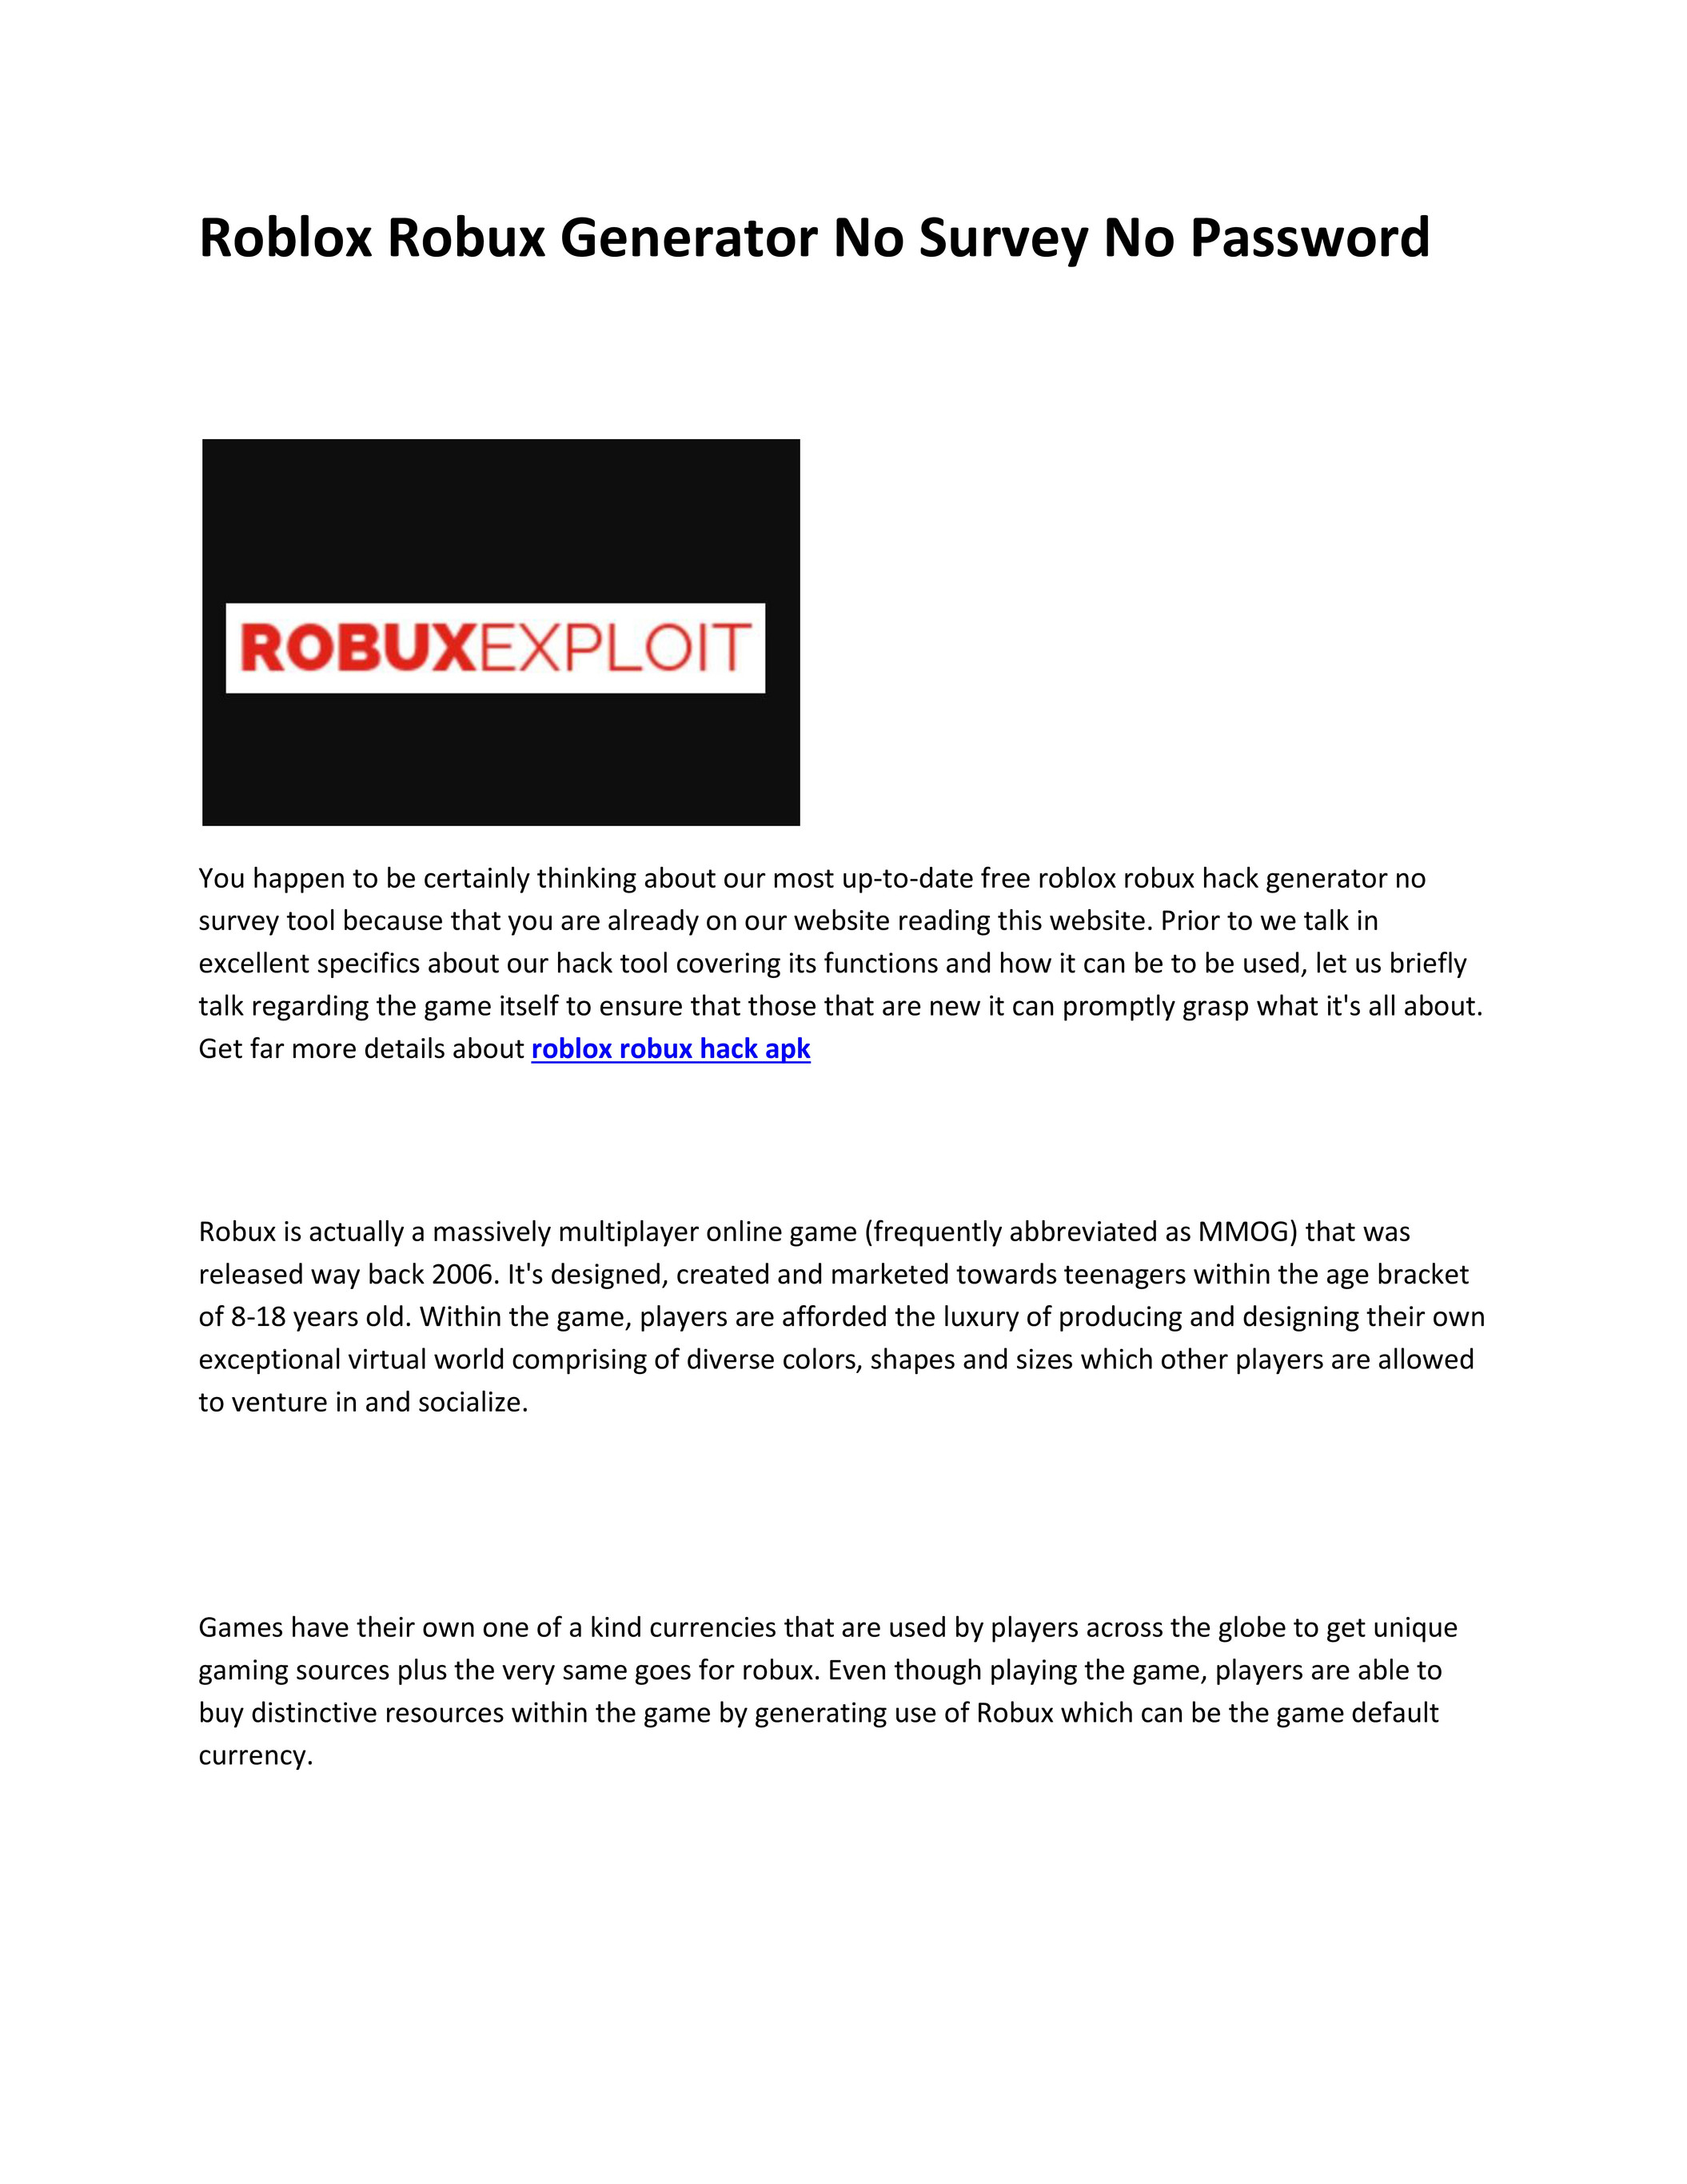 My Publications Roblox Robux Hack Page 1 Created With Publitas Com - robux generator free robux websites that actually work